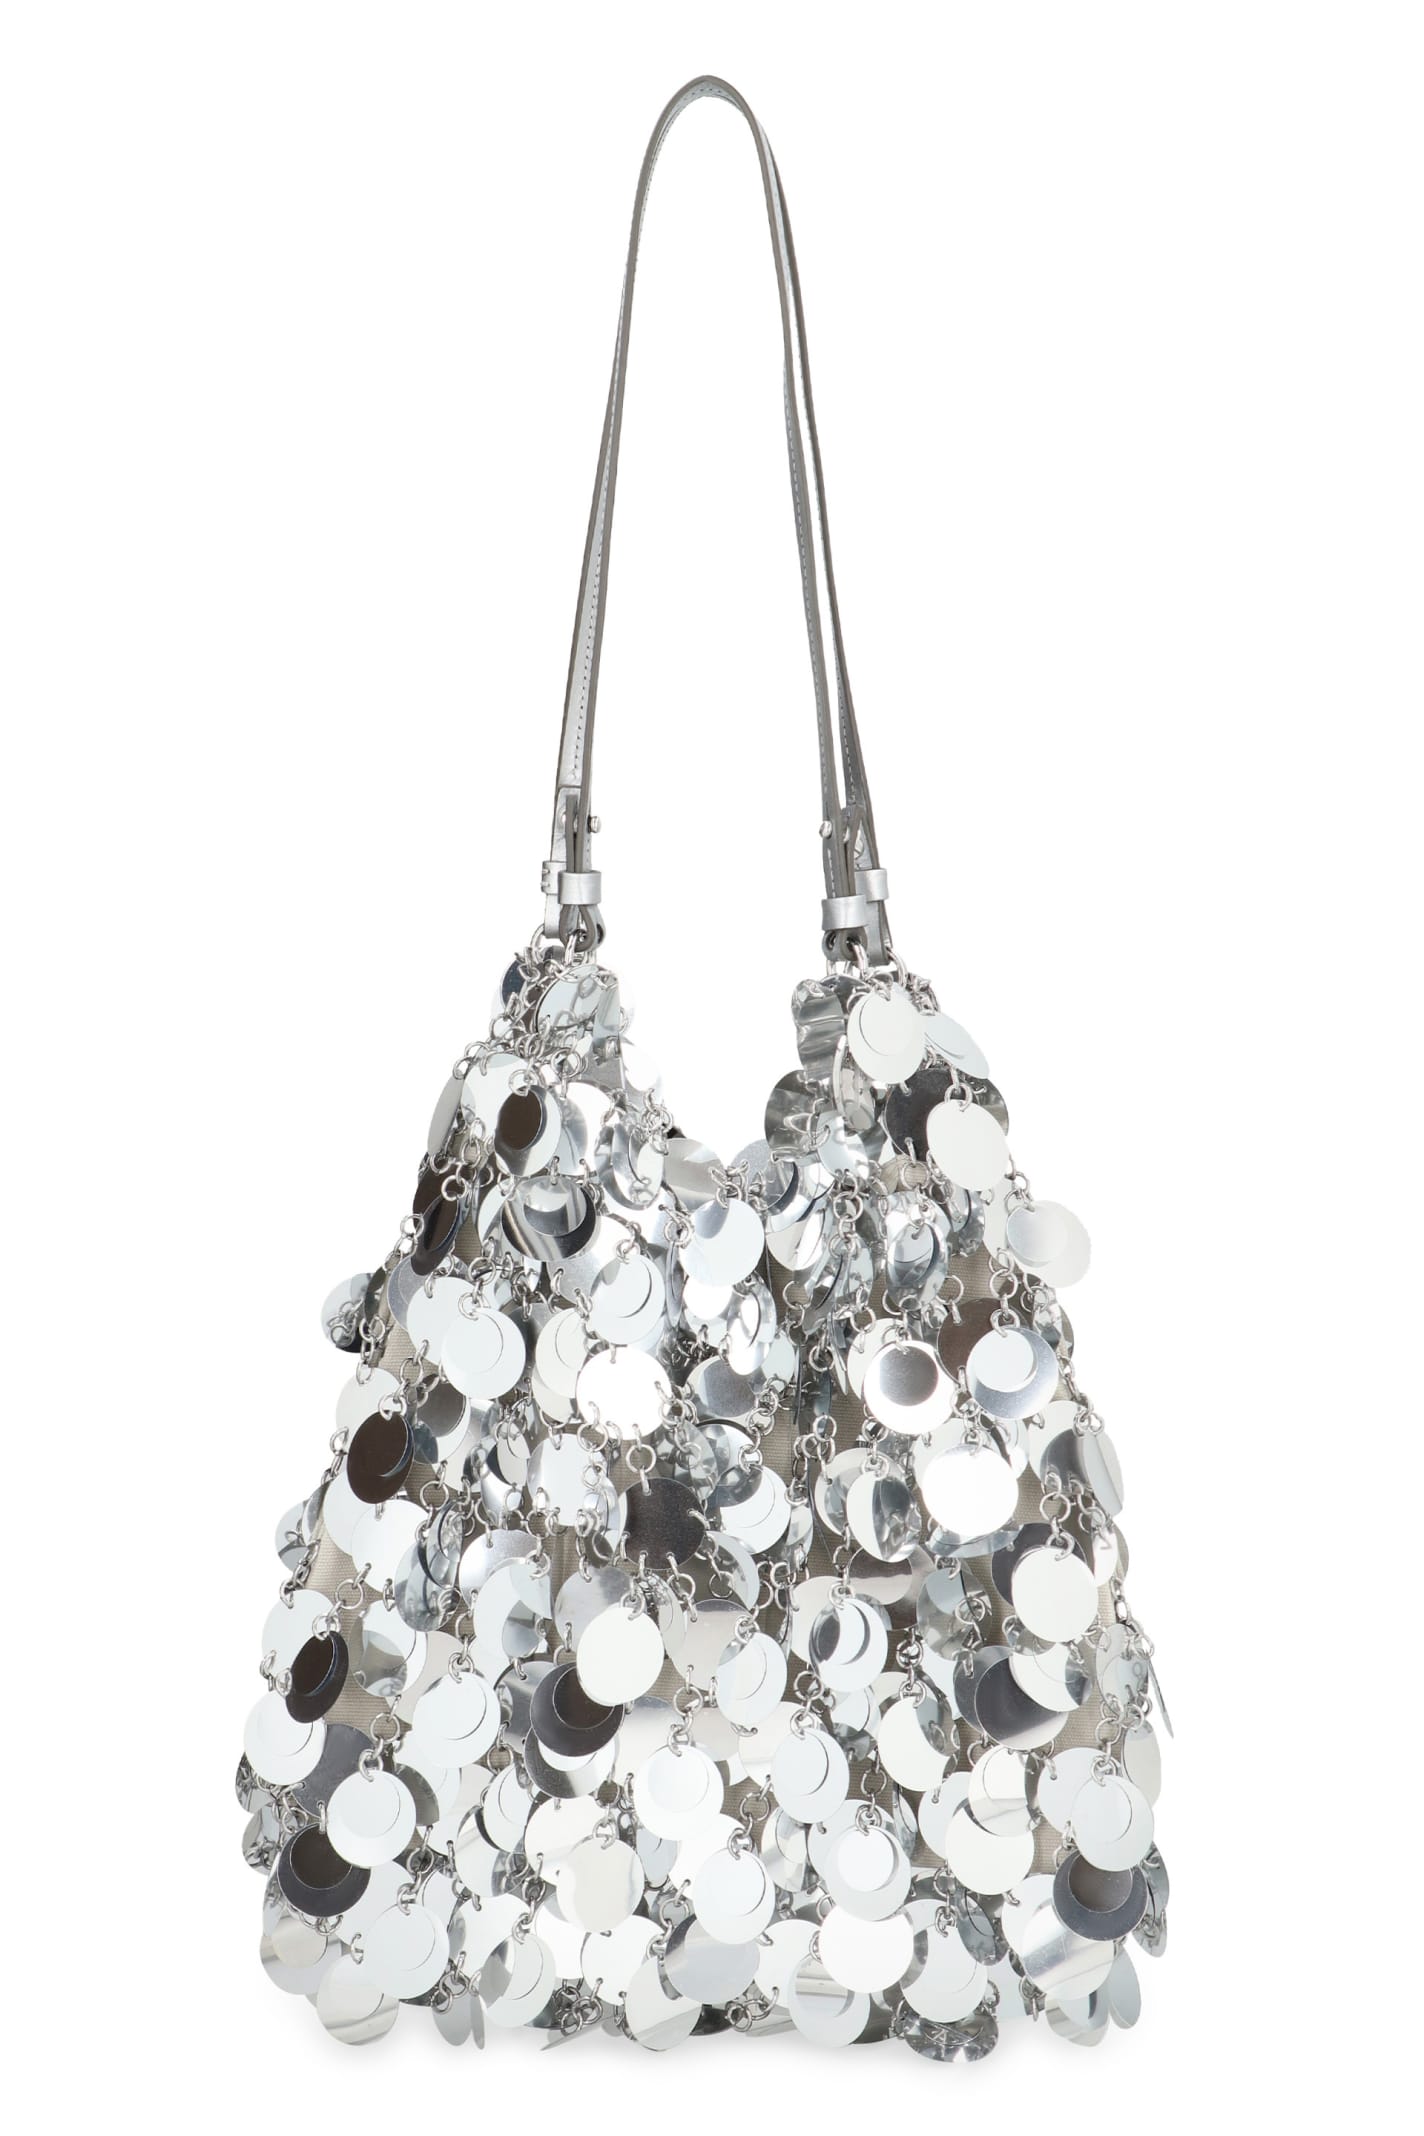 Paco Rabanne Sparkles Tote Bag In Silver